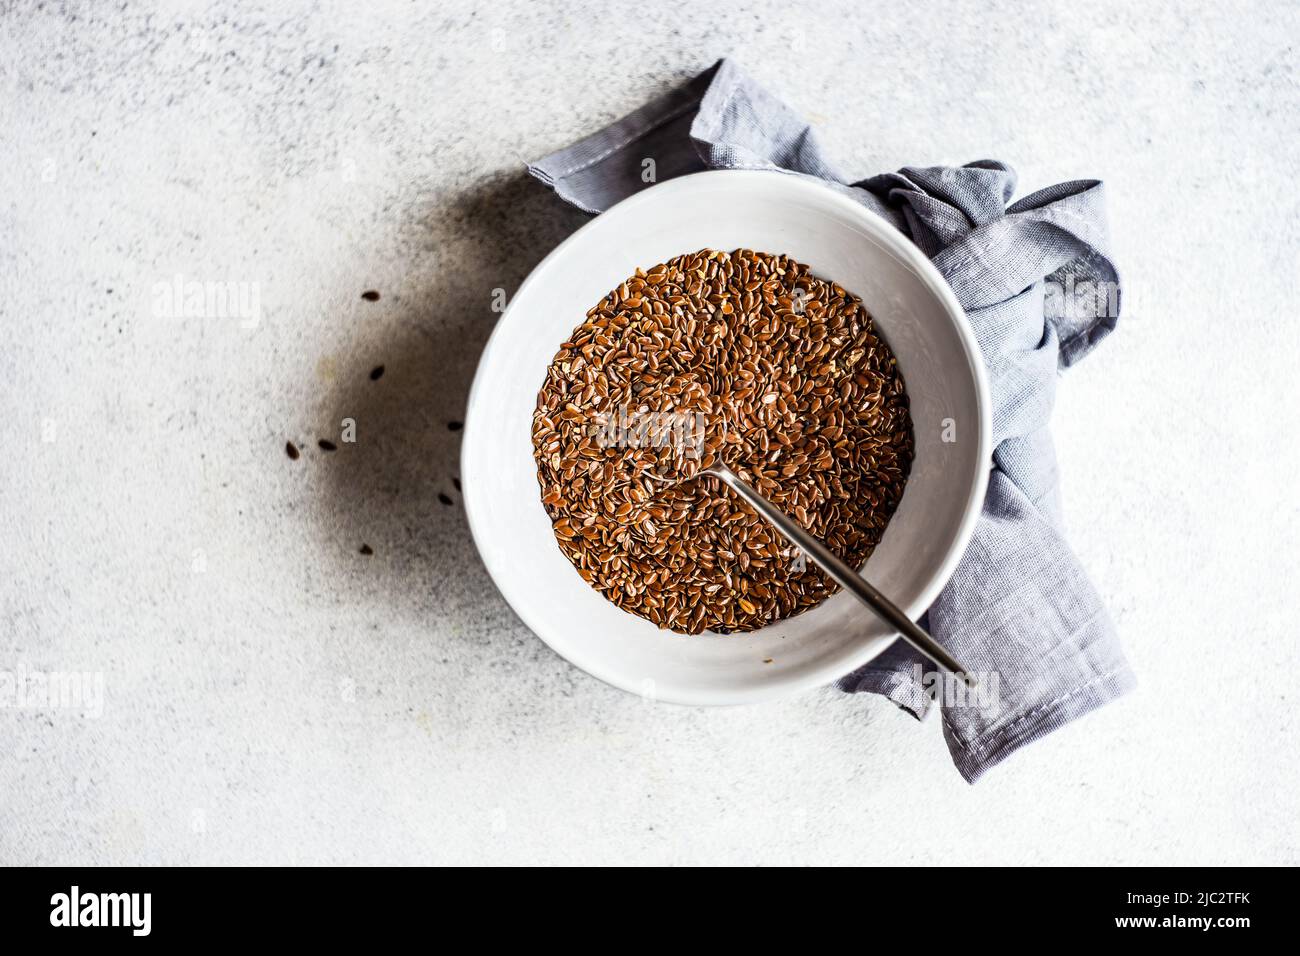 Overhead view of a bowl of organic flax seeds Stock Photo